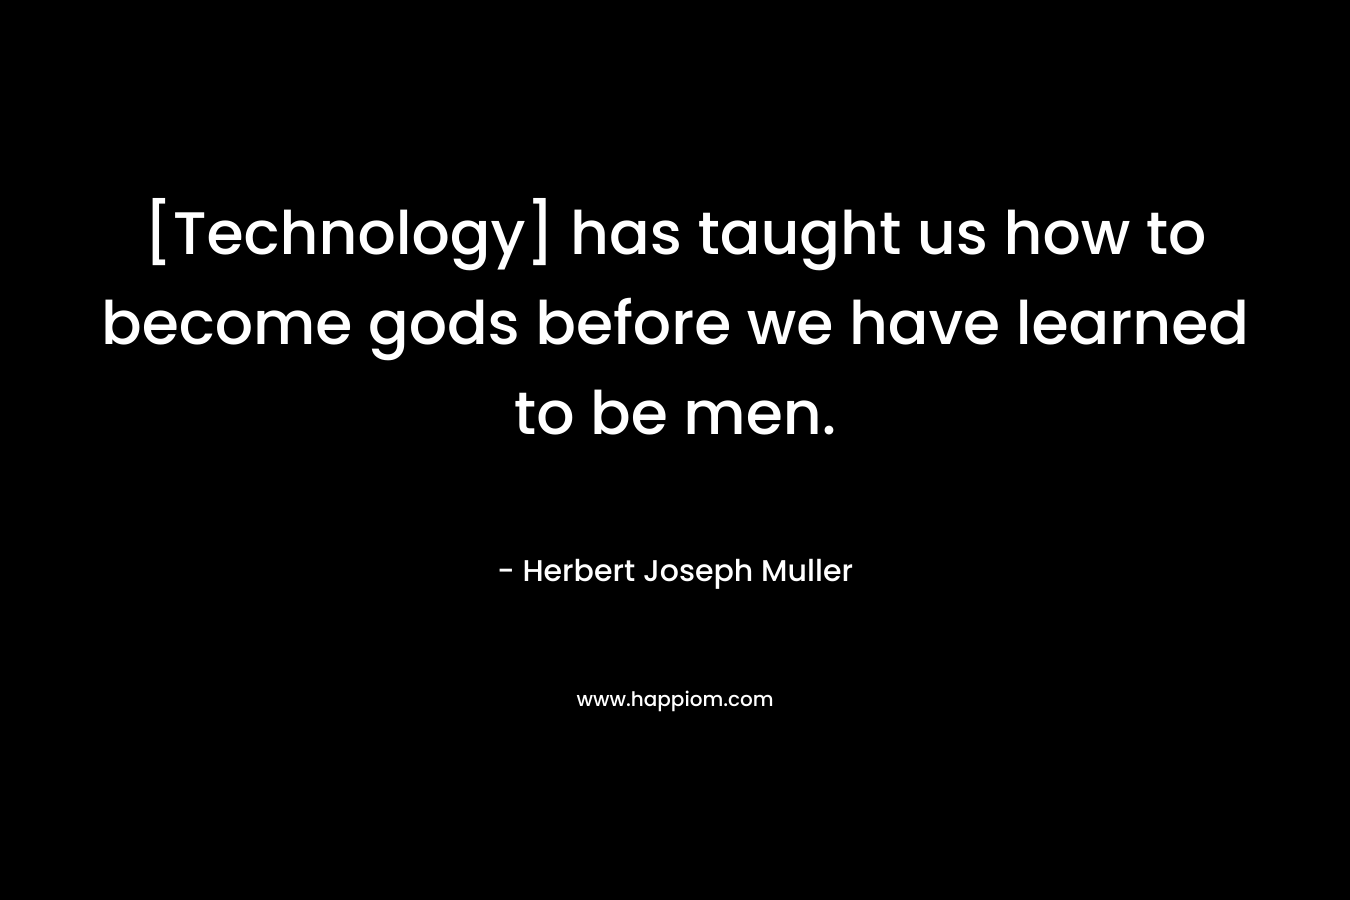 [Technology] has taught us how to become gods before we have learned to be men.